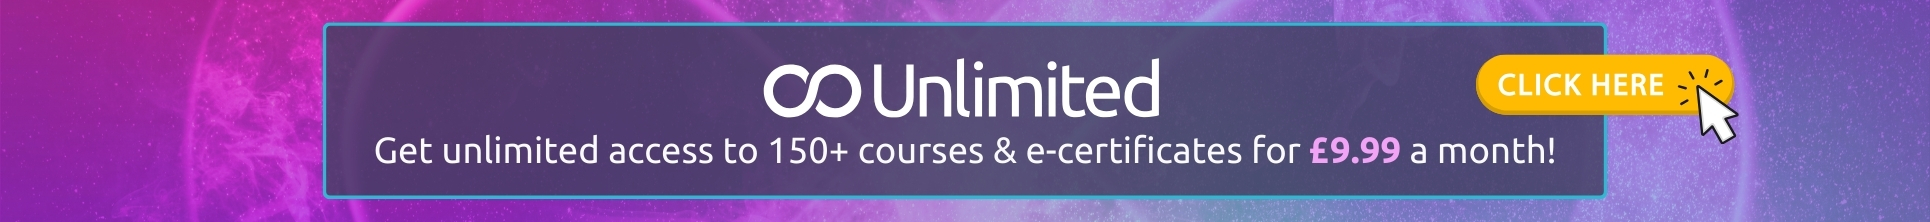 Get unlimited access to 150+ courses & e-certificates for £9.99 a month with a Short Courses Unlimited subscription!